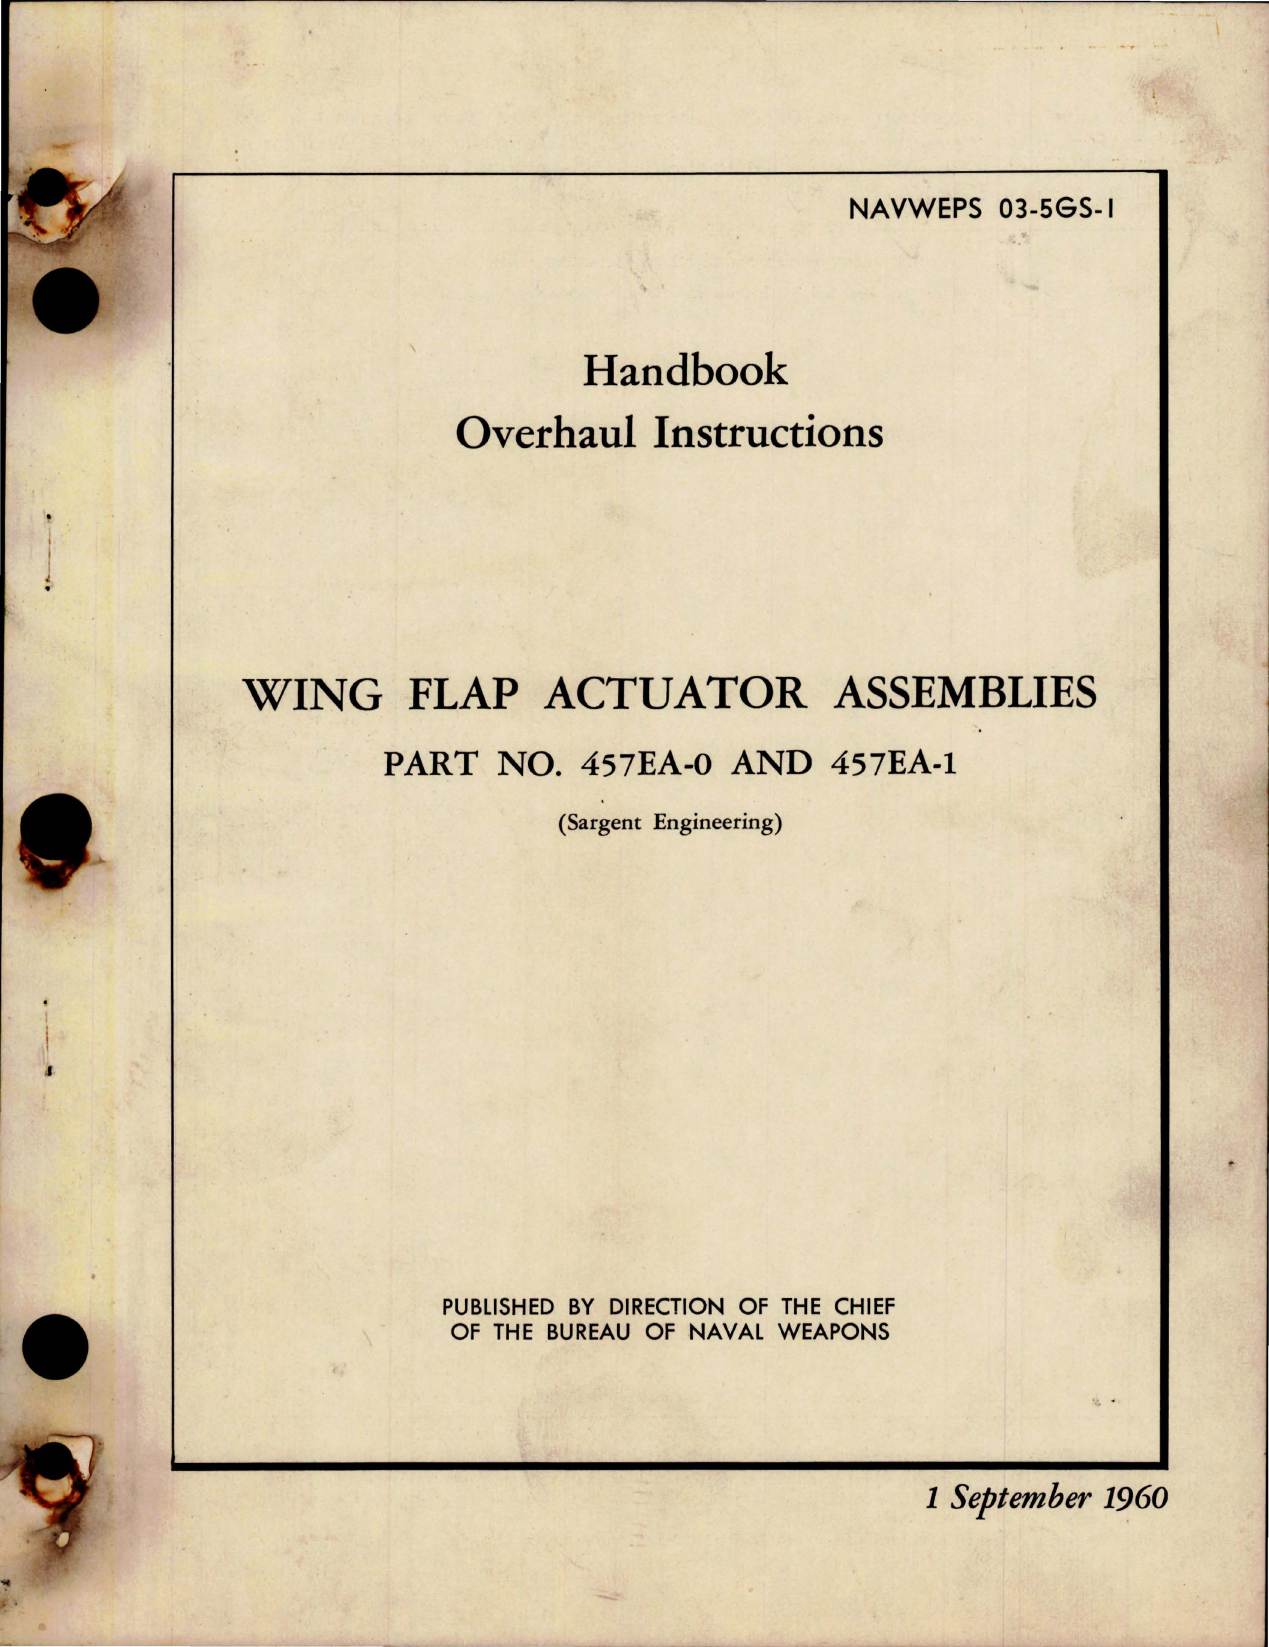 Sample page 1 from AirCorps Library document: Overhaul Instructions for Wing Flap Actuator Assy - Parts 457EA-0 and 457EA-1 